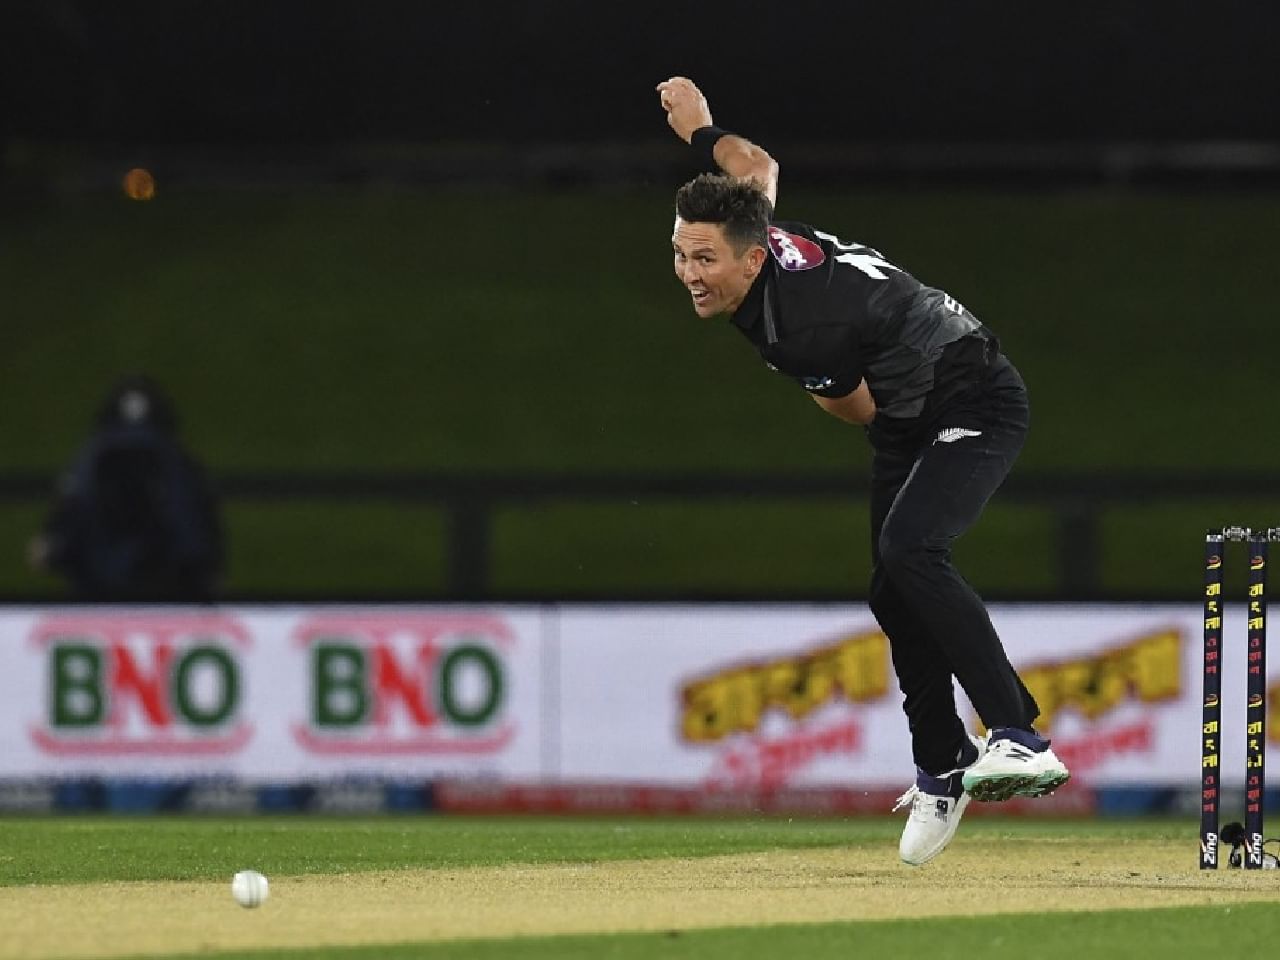 Would be very surprised if Trent Boult doesn’t play in ODI World Cup: NZC CEO David White